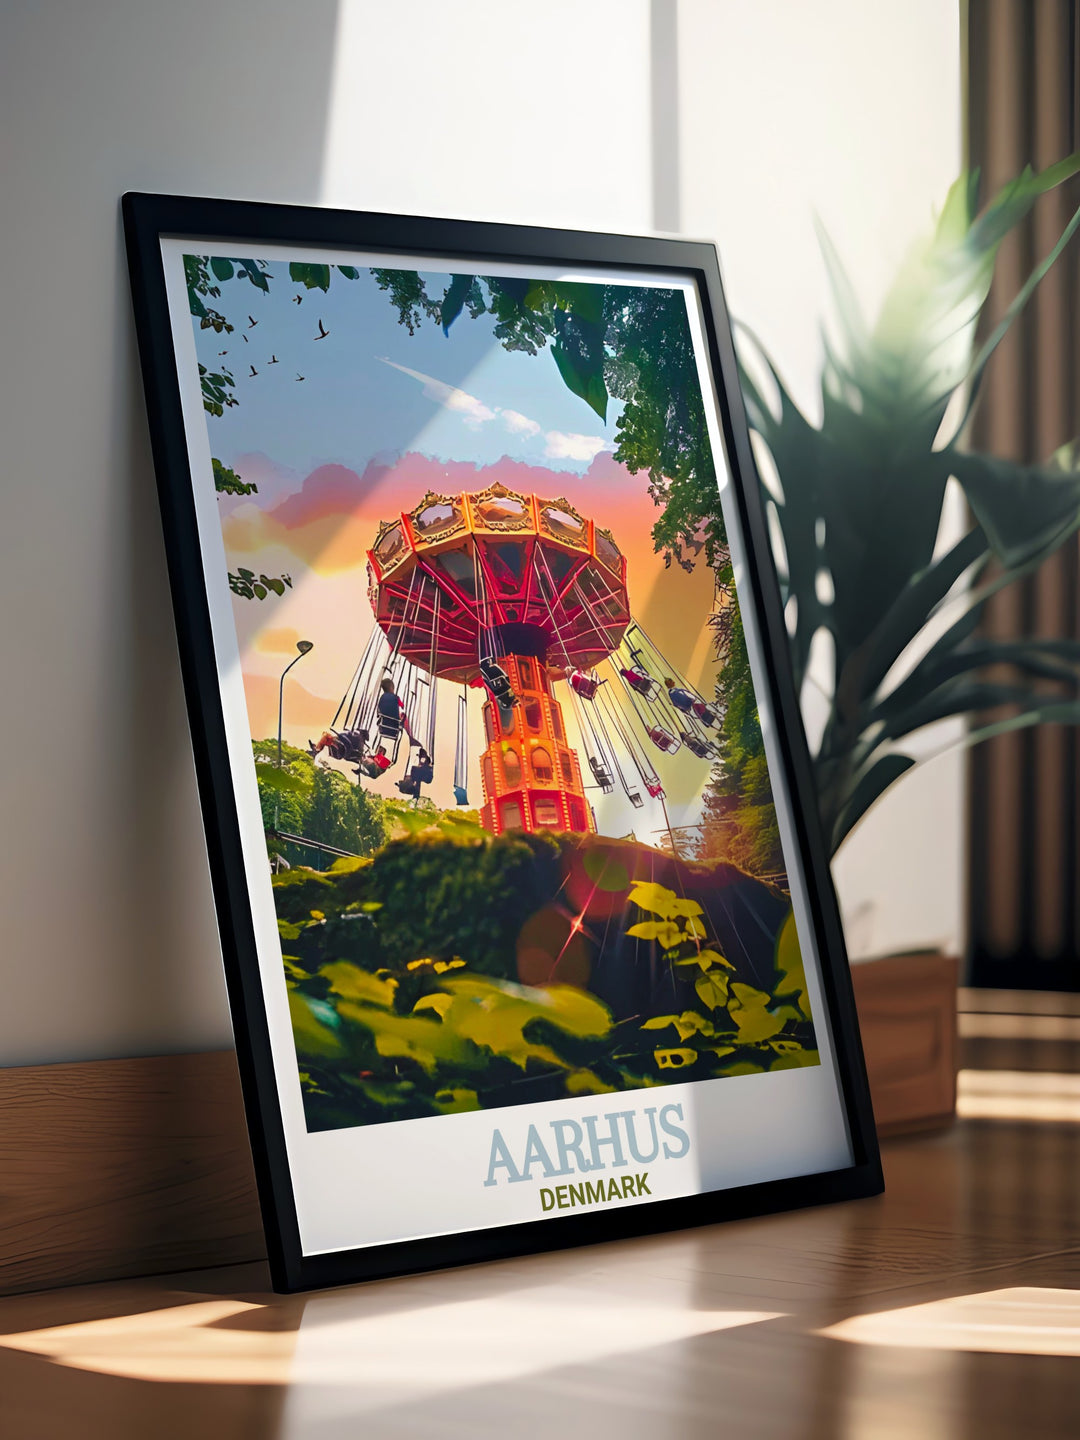 Enhance your space with Tivoli Friheden artwork. This Aarhus poster is perfect for those who appreciate the charm of amusement parks and Aarhus travel. It makes an excellent Aarhus gift and adds a touch of Danish whimsy to any room.